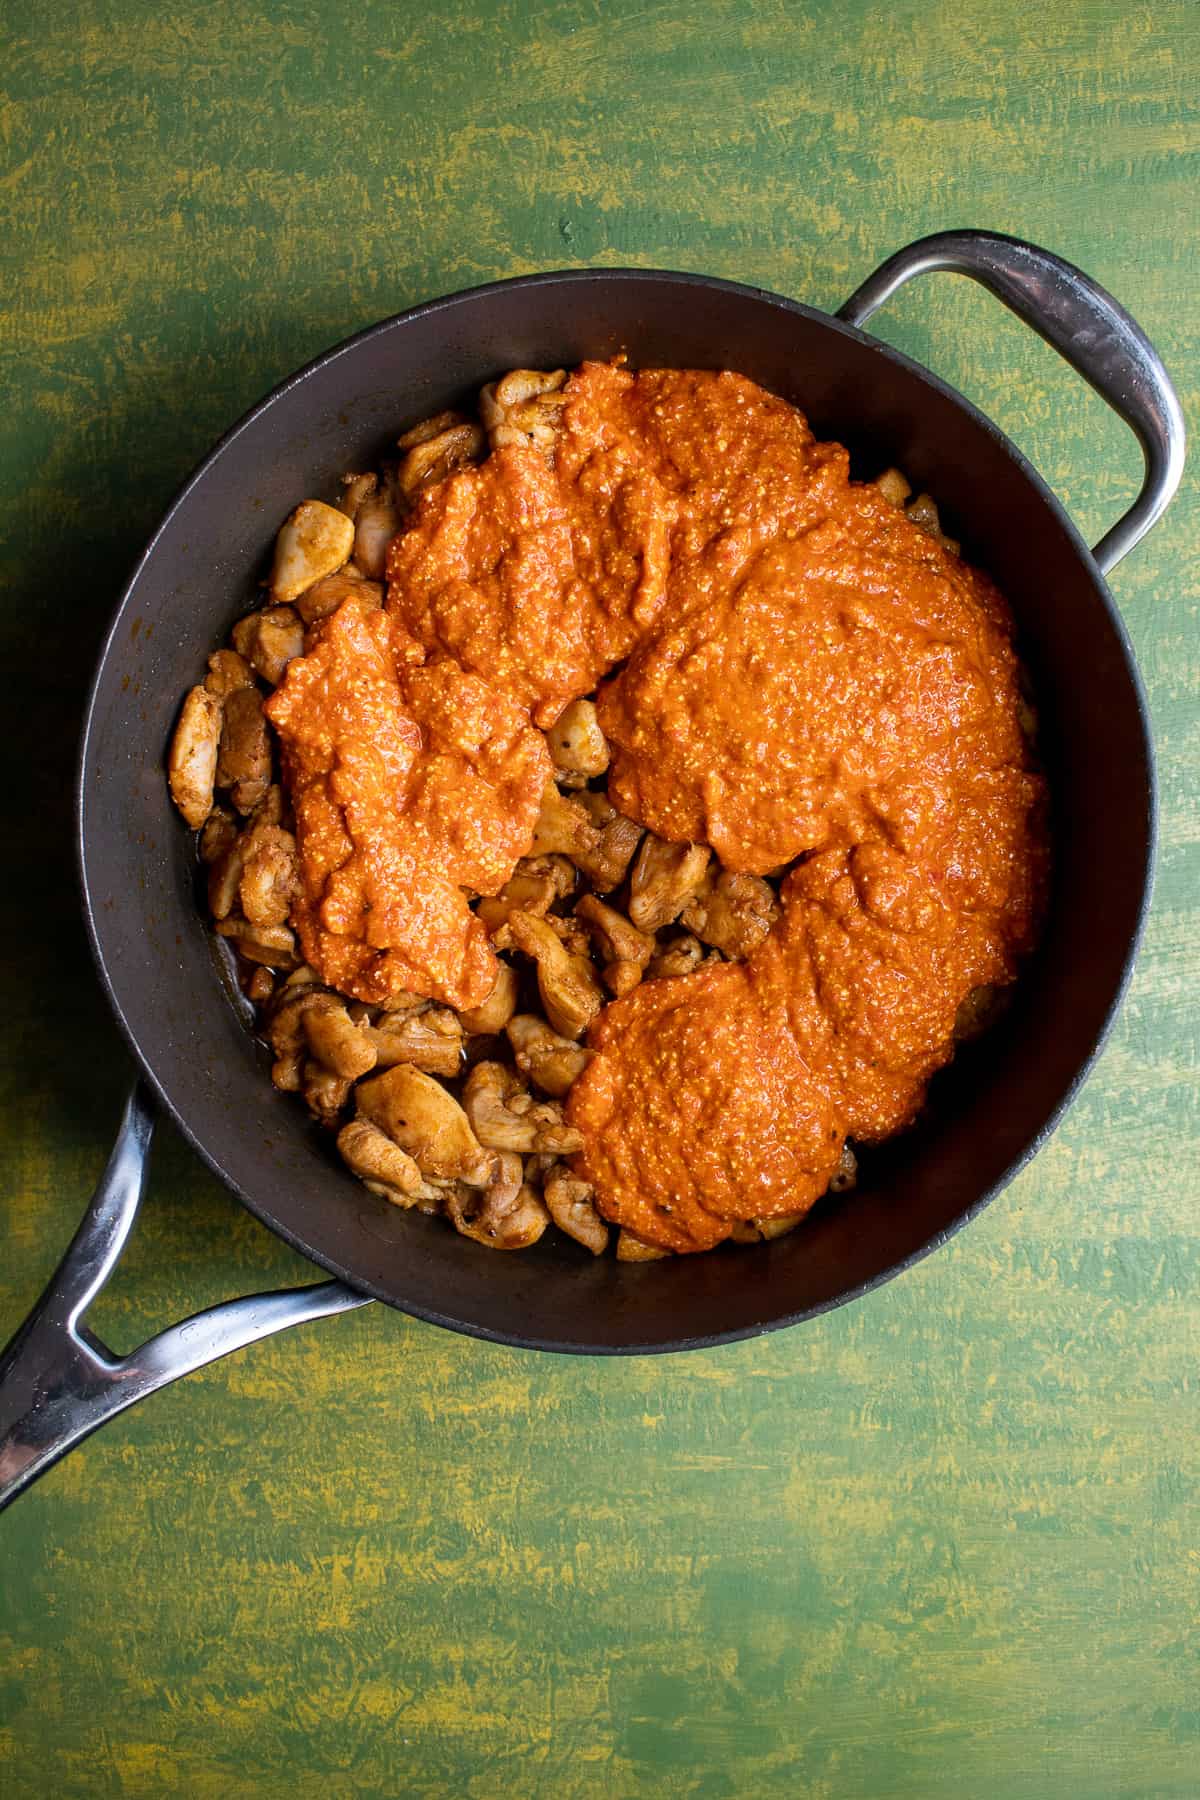 The red pepper sauce poured over the cooked chicken in a black skillet.